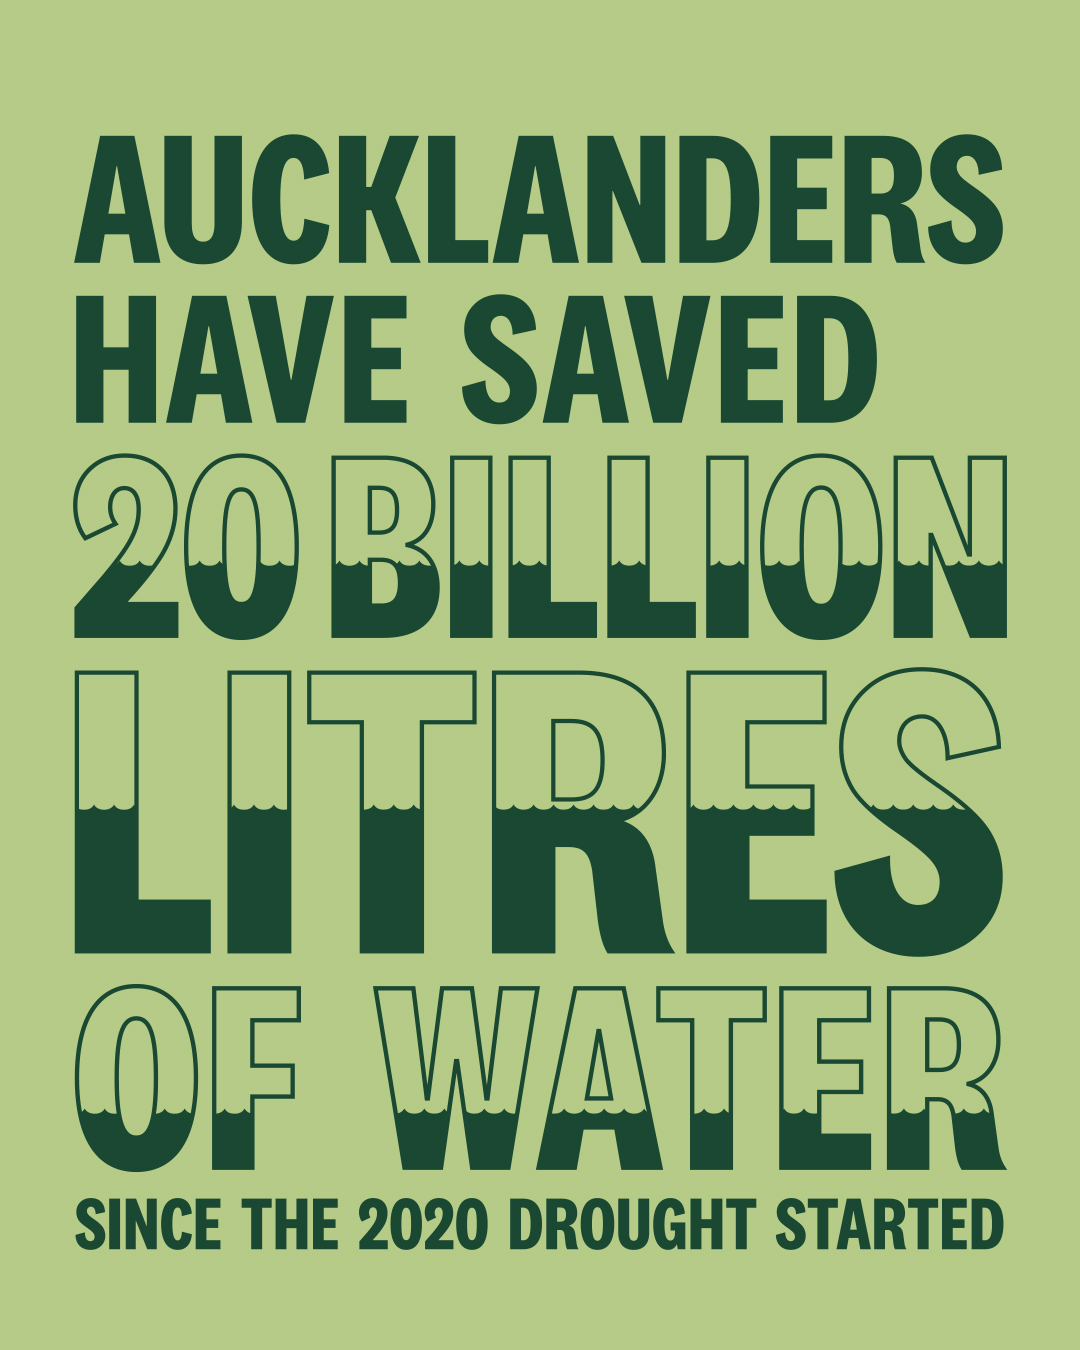 Aucklanders have saved 20 billion litres of water since the  2020 drought started. That&#x27;s 8,000 olympic swimming pools&#x27; worth of water.